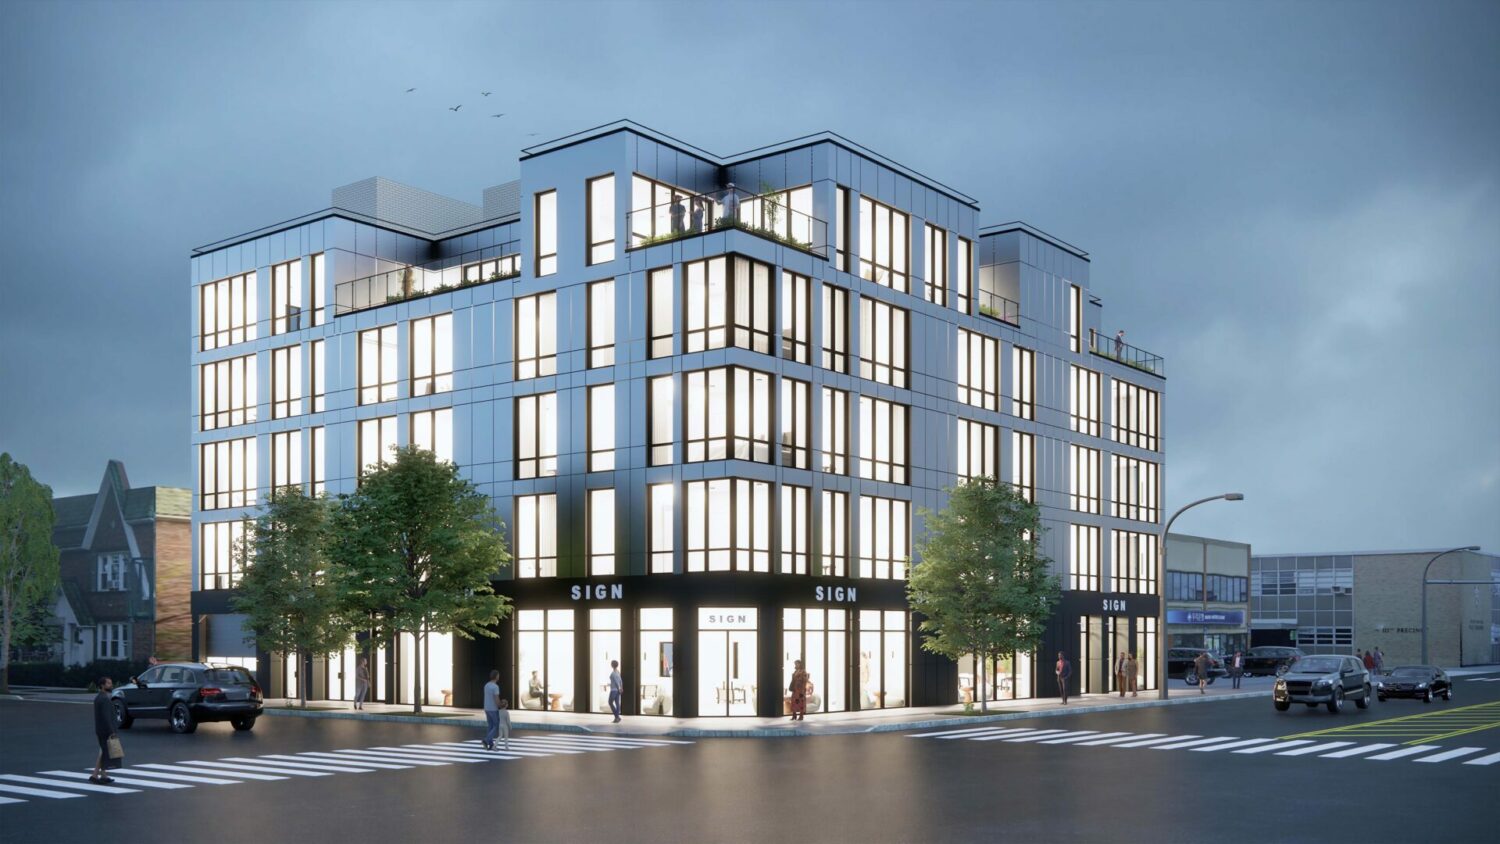 Render of 215-20 Northern Boulevard, by Caliendo Architects